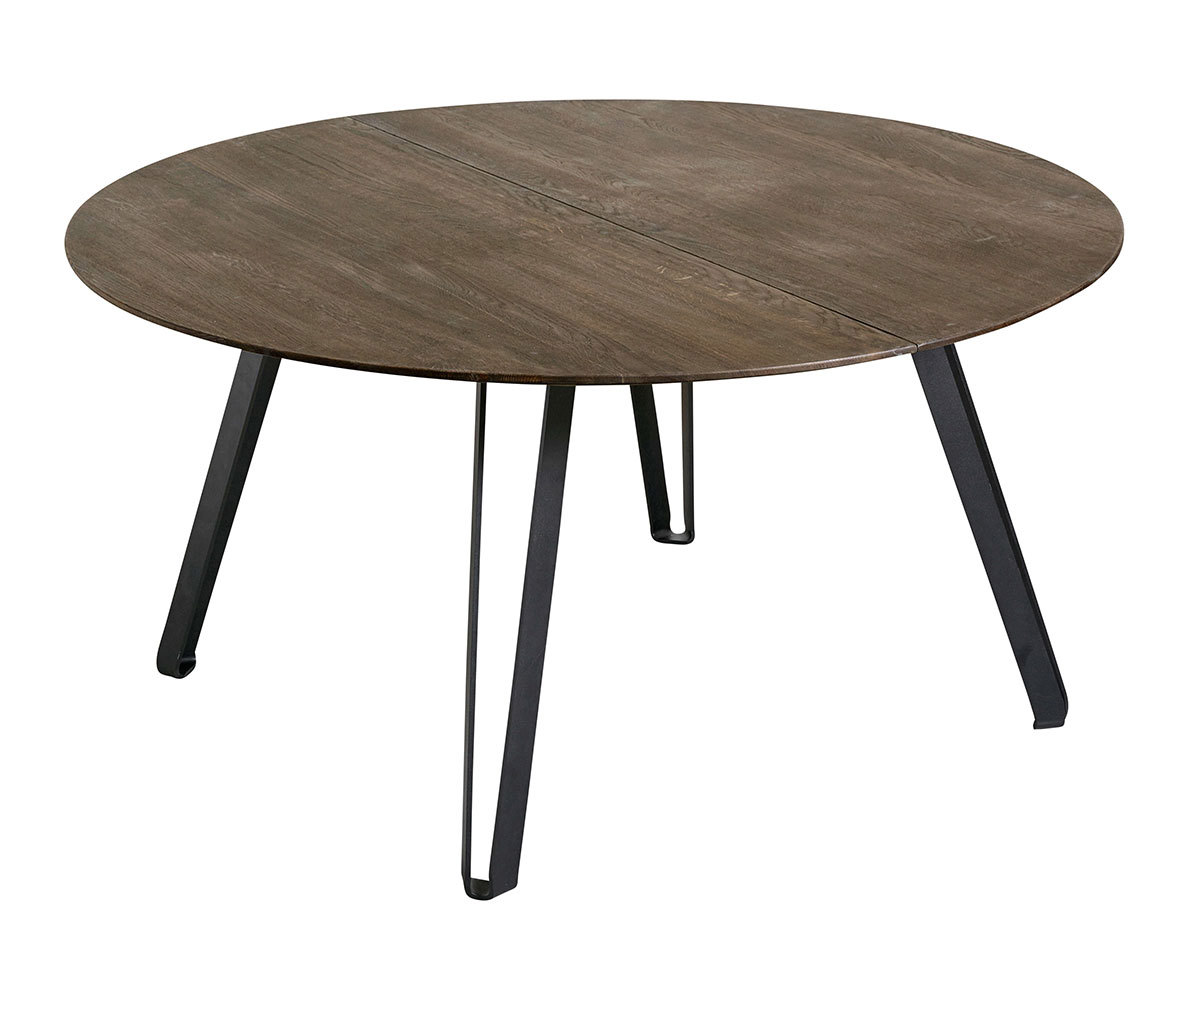 Muubs Space Dining Table Smoked Oak, ø 150 cm